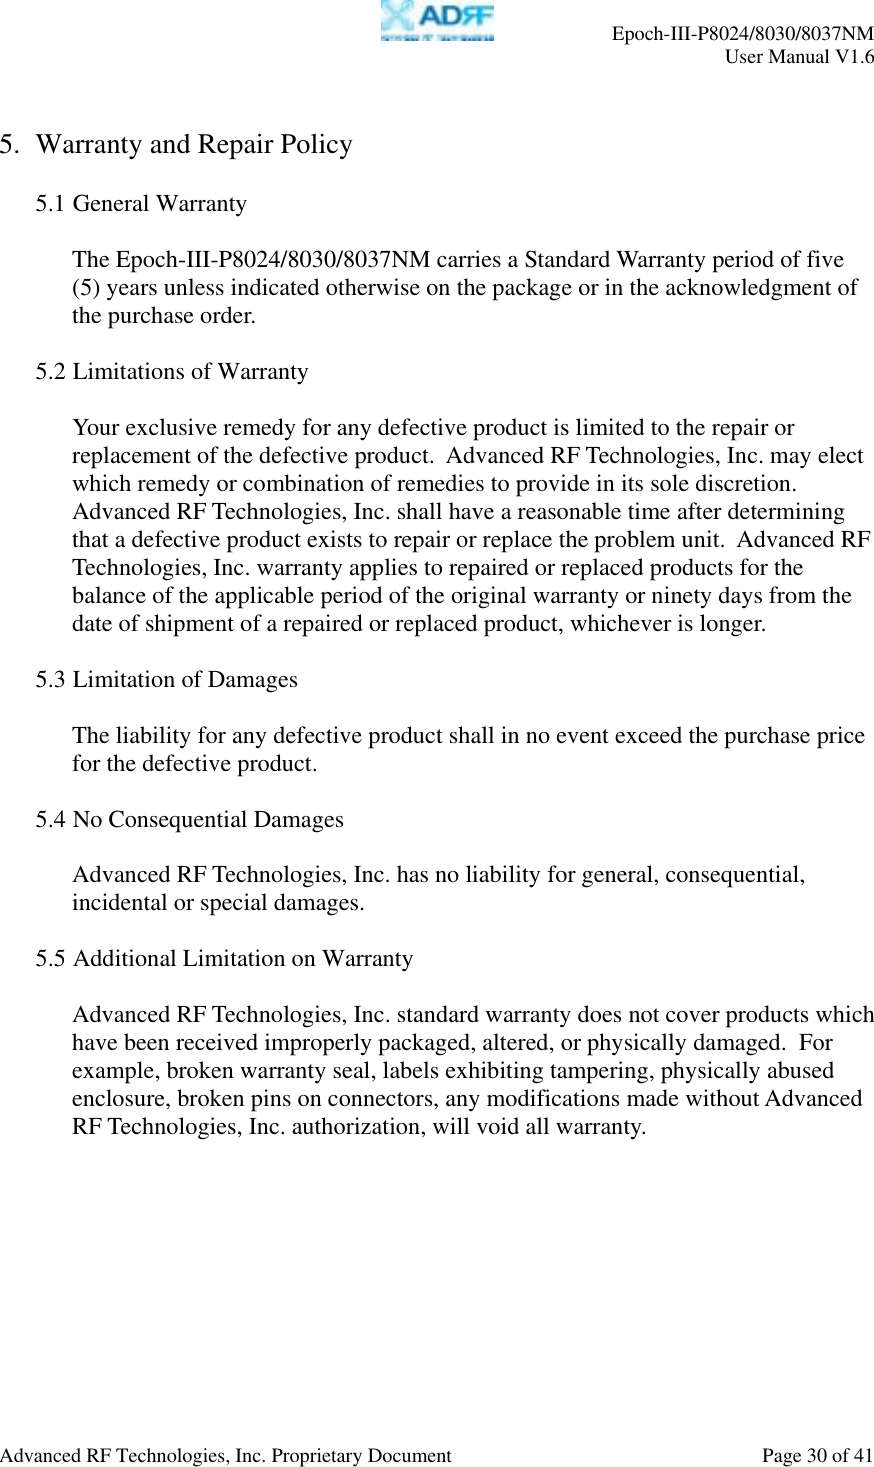     Epoch-III-P8024/8030/8037NM  User Manual V1.6  Advanced RF Technologies, Inc. Proprietary Document  Page 30 of 41  5. Warranty and Repair Policy  5.1 General Warranty  The Epoch-III-P8024/8030/8037NM carries a Standard Warranty period of five (5) years unless indicated otherwise on the package or in the acknowledgment of the purchase order.  5.2 Limitations of Warranty  Your exclusive remedy for any defective product is limited to the repair or replacement of the defective product.  Advanced RF Technologies, Inc. may elect which remedy or combination of remedies to provide in its sole discretion.  Advanced RF Technologies, Inc. shall have a reasonable time after determining that a defective product exists to repair or replace the problem unit.  Advanced RF Technologies, Inc. warranty applies to repaired or replaced products for the balance of the applicable period of the original warranty or ninety days from the date of shipment of a repaired or replaced product, whichever is longer.   5.3 Limitation of Damages  The liability for any defective product shall in no event exceed the purchase price for the defective product.    5.4 No Consequential Damages  Advanced RF Technologies, Inc. has no liability for general, consequential, incidental or special damages.    5.5 Additional Limitation on Warranty  Advanced RF Technologies, Inc. standard warranty does not cover products which have been received improperly packaged, altered, or physically damaged.  For example, broken warranty seal, labels exhibiting tampering, physically abused enclosure, broken pins on connectors, any modifications made without Advanced RF Technologies, Inc. authorization, will void all warranty.    